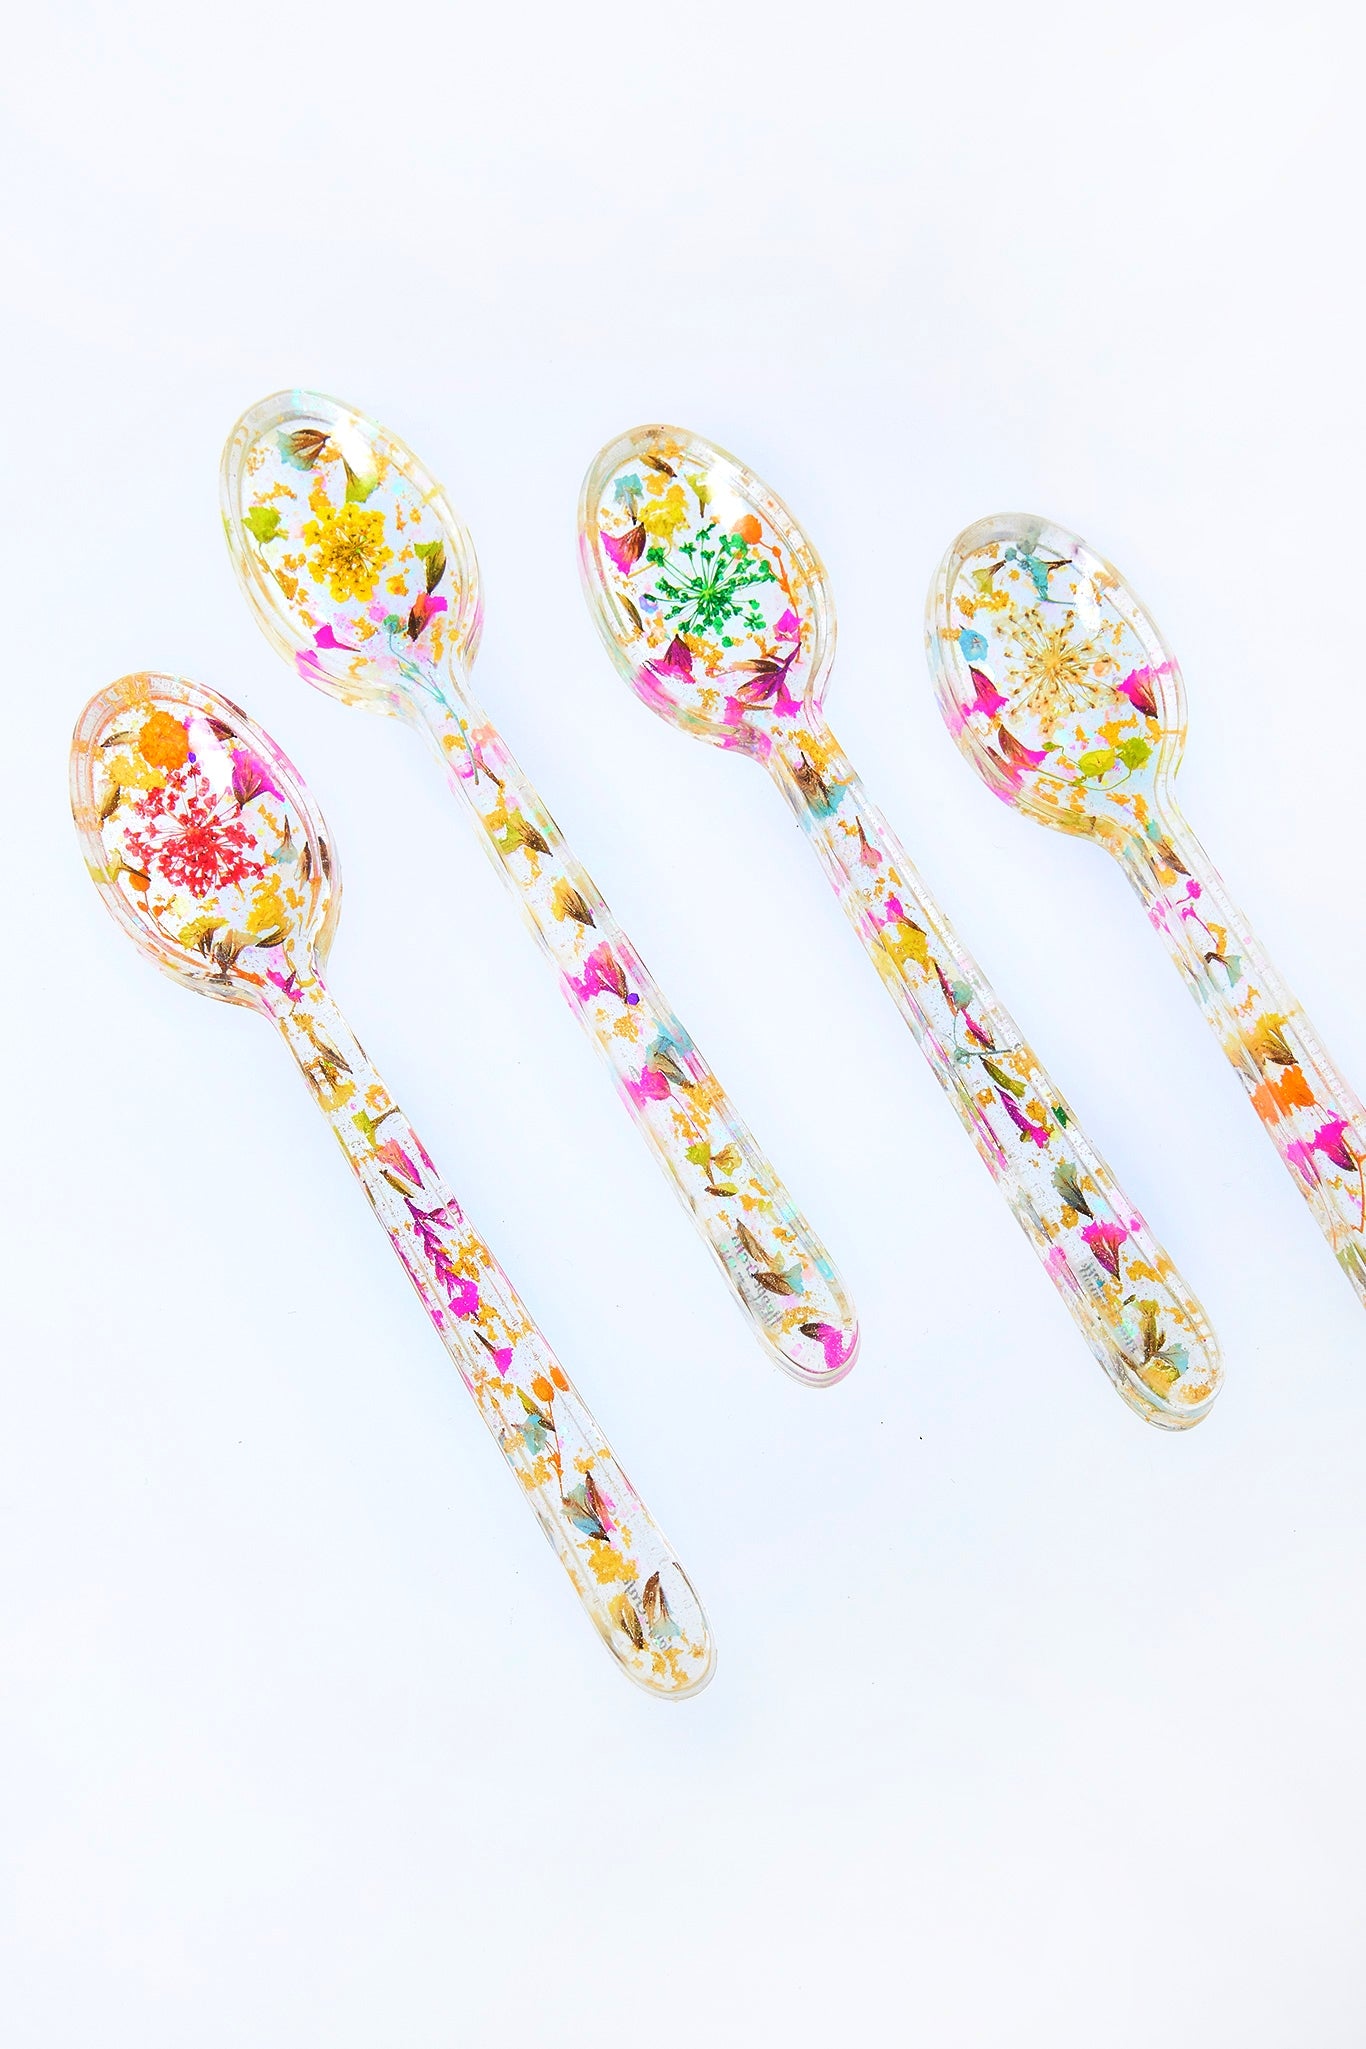 A Set of 4 Floral Spoons